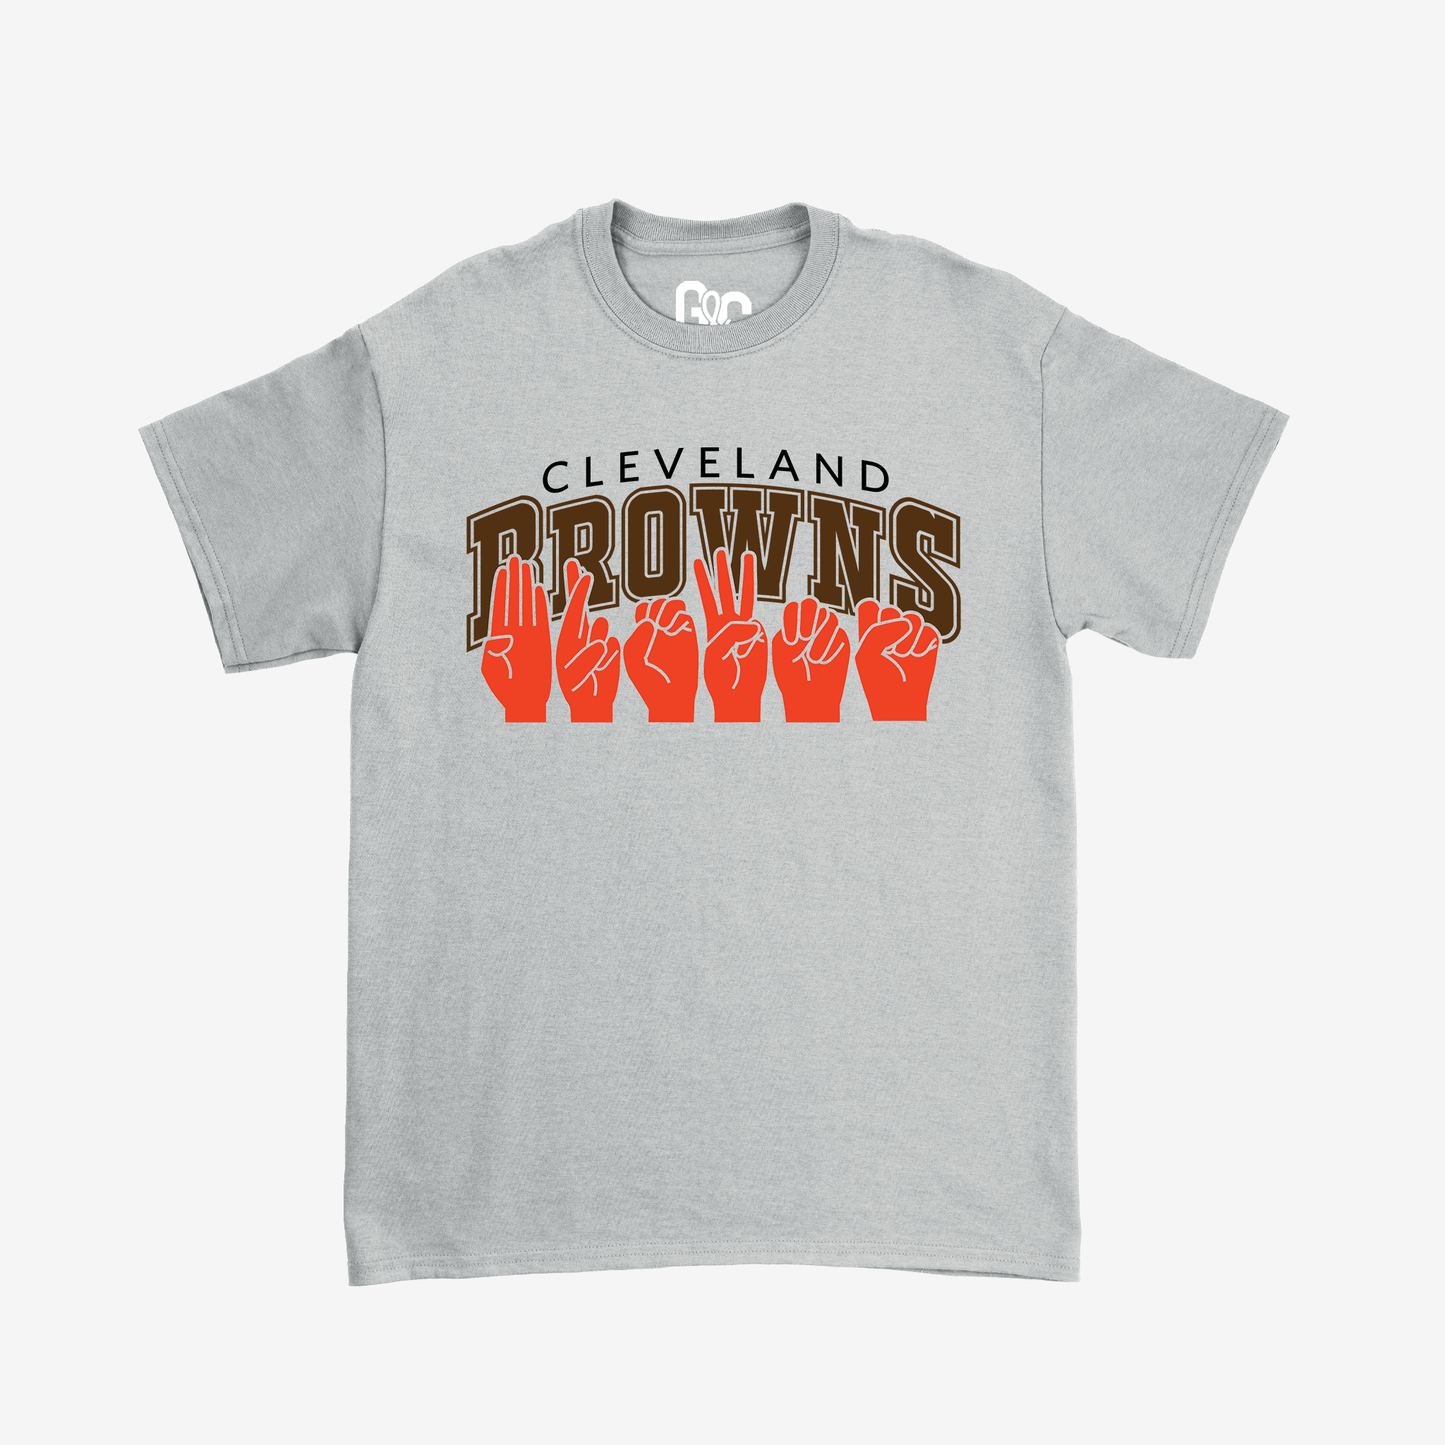 Cleveland Browns Tee